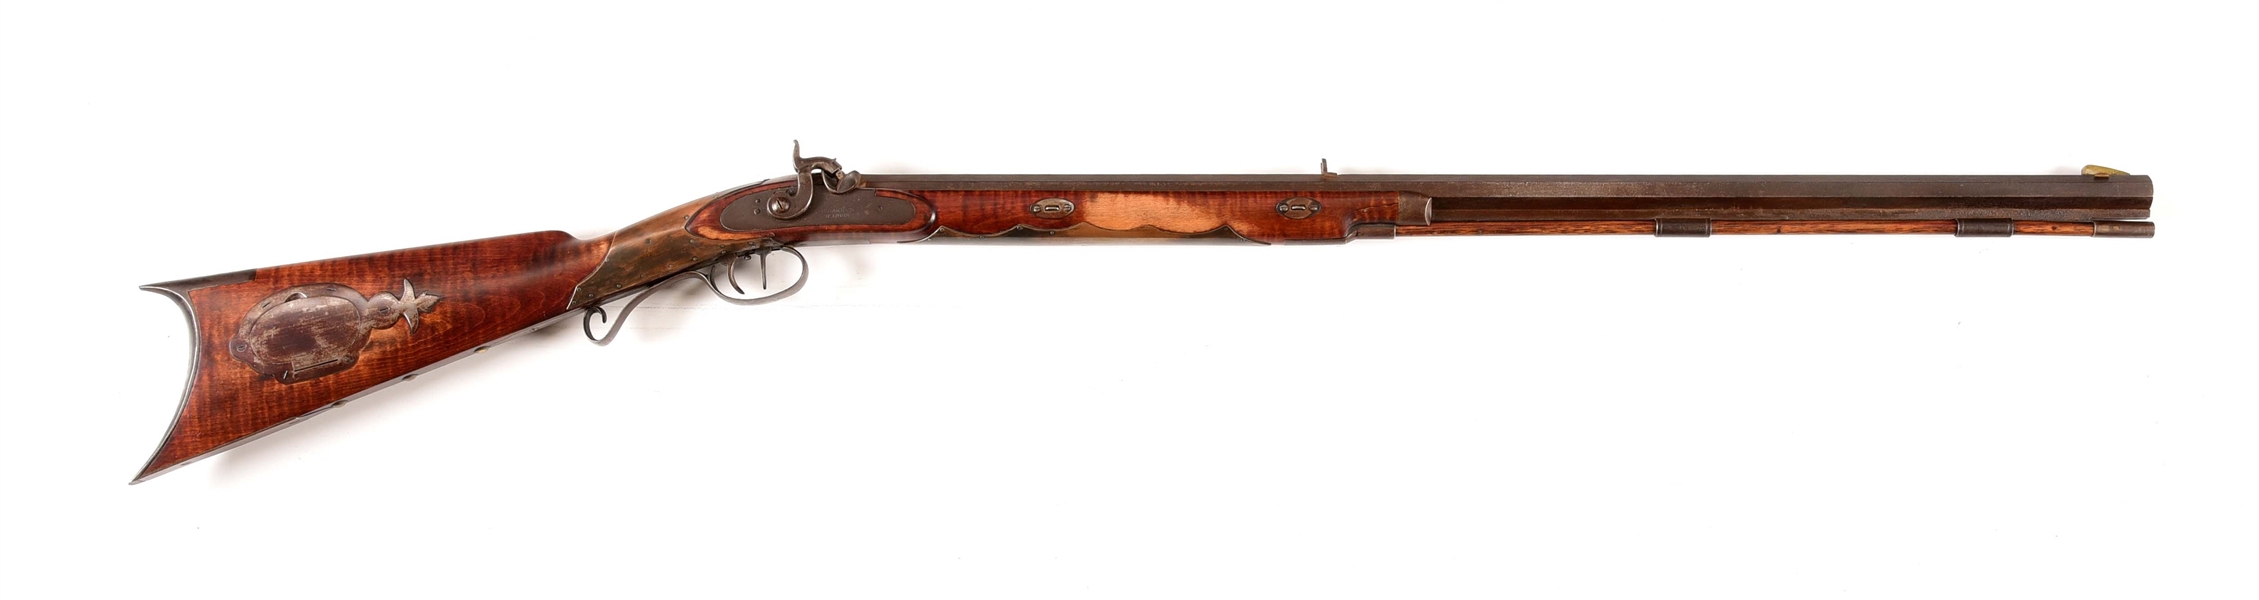 (A) S. HAWKEN REPRODUCTION MARKED PERCUSSION PLAINS RIFLE.